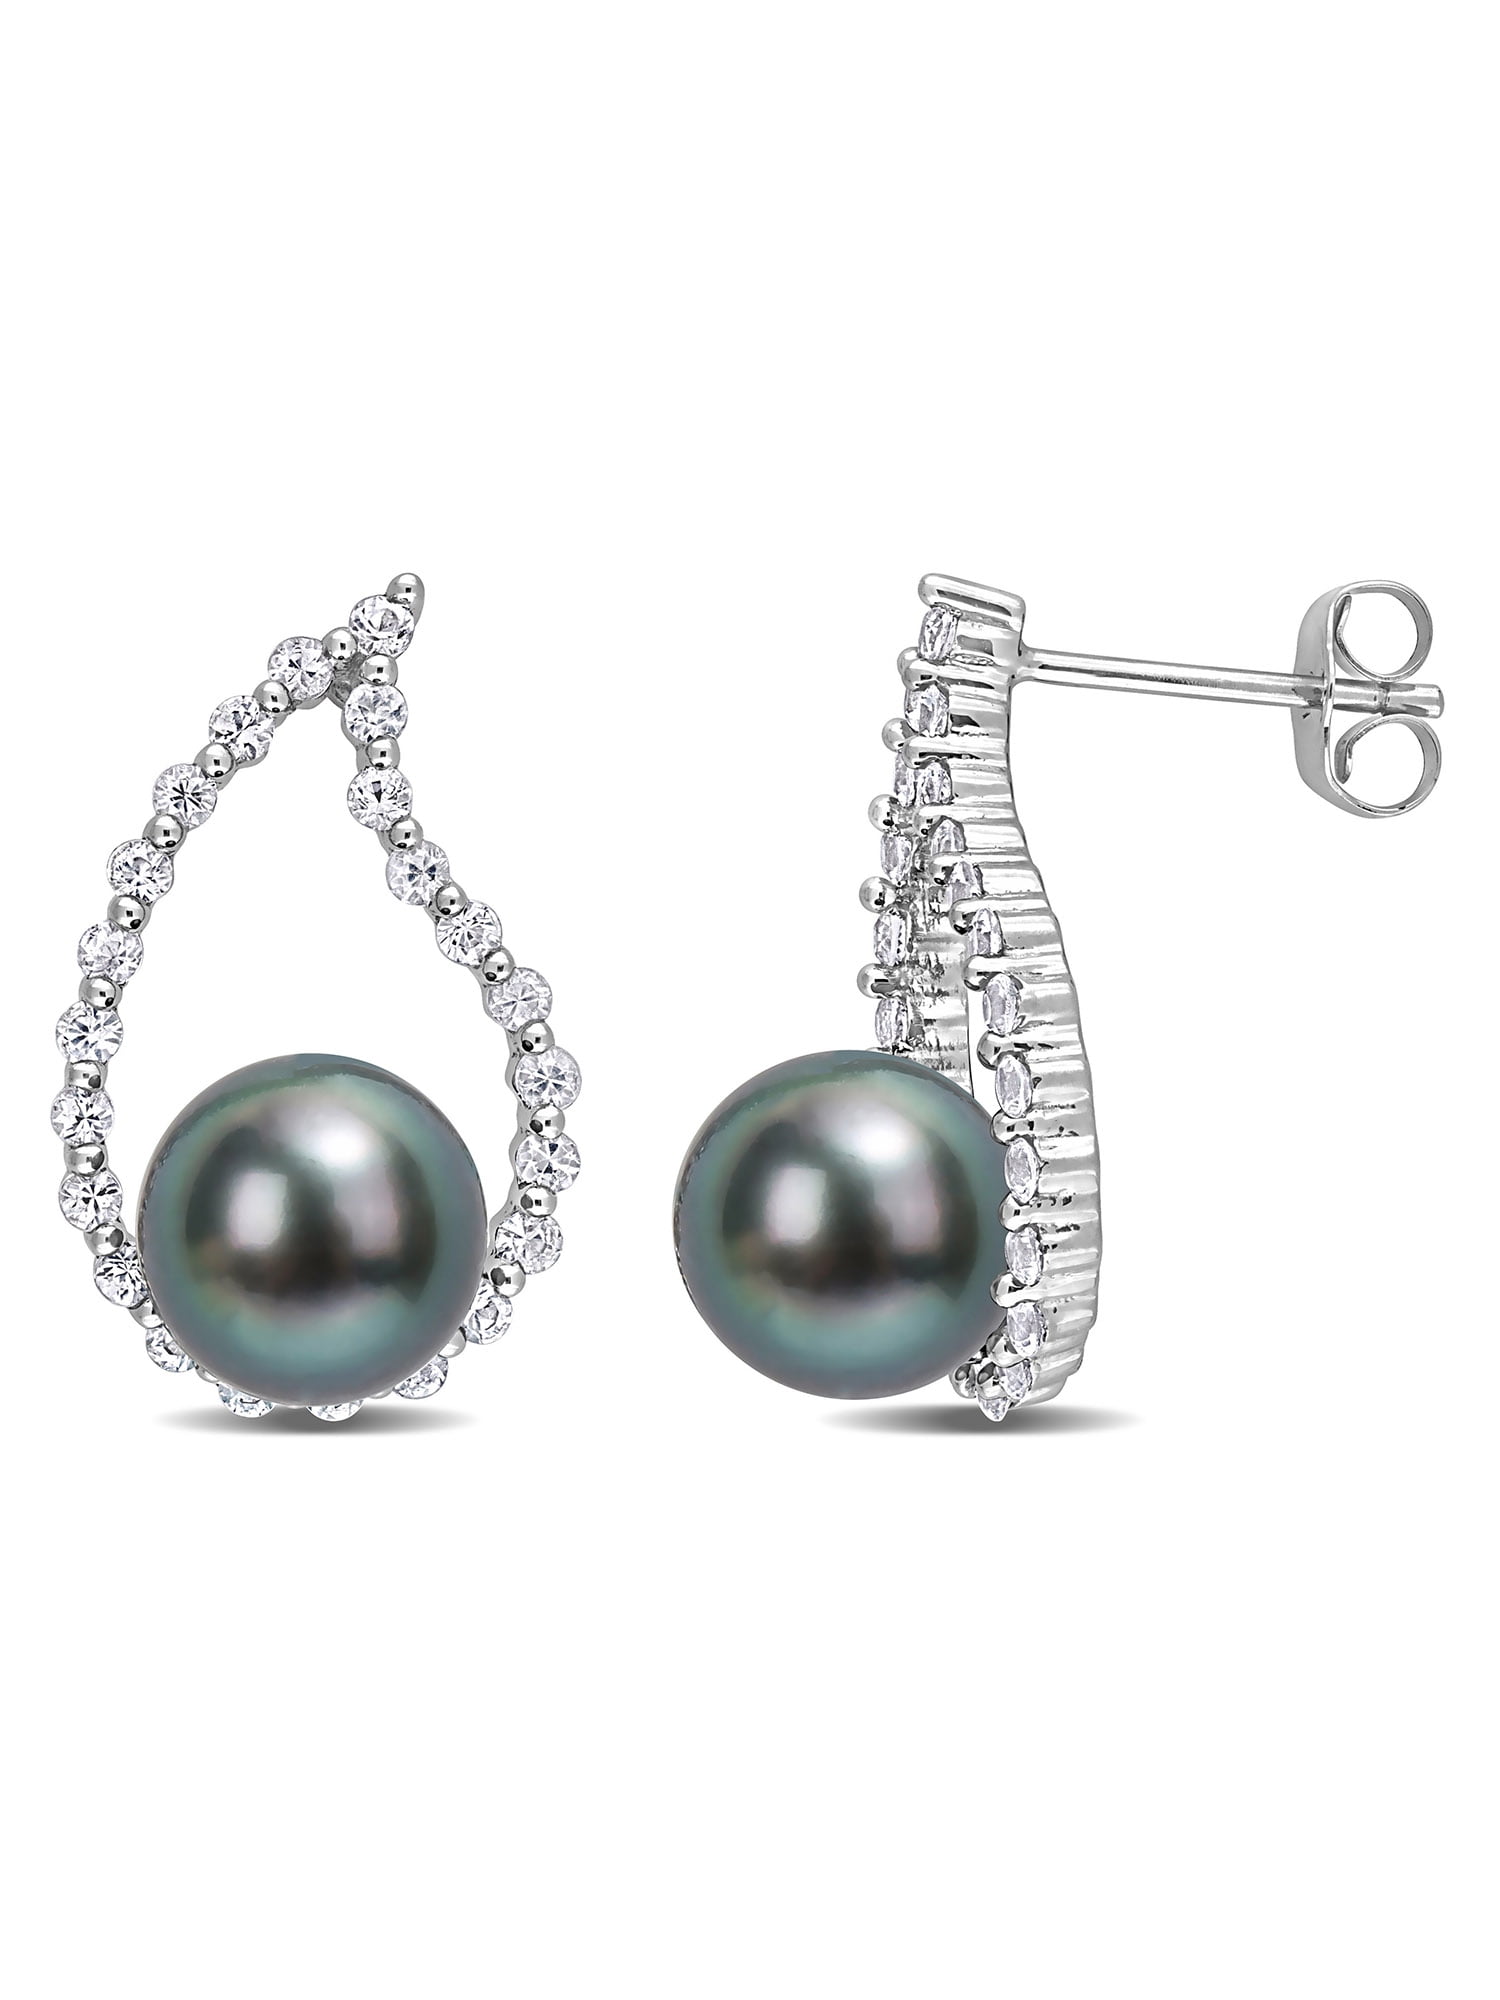 8-8.5mm Black Tahitian Cultured Pearl and 3/4 Carat T.G.W. White